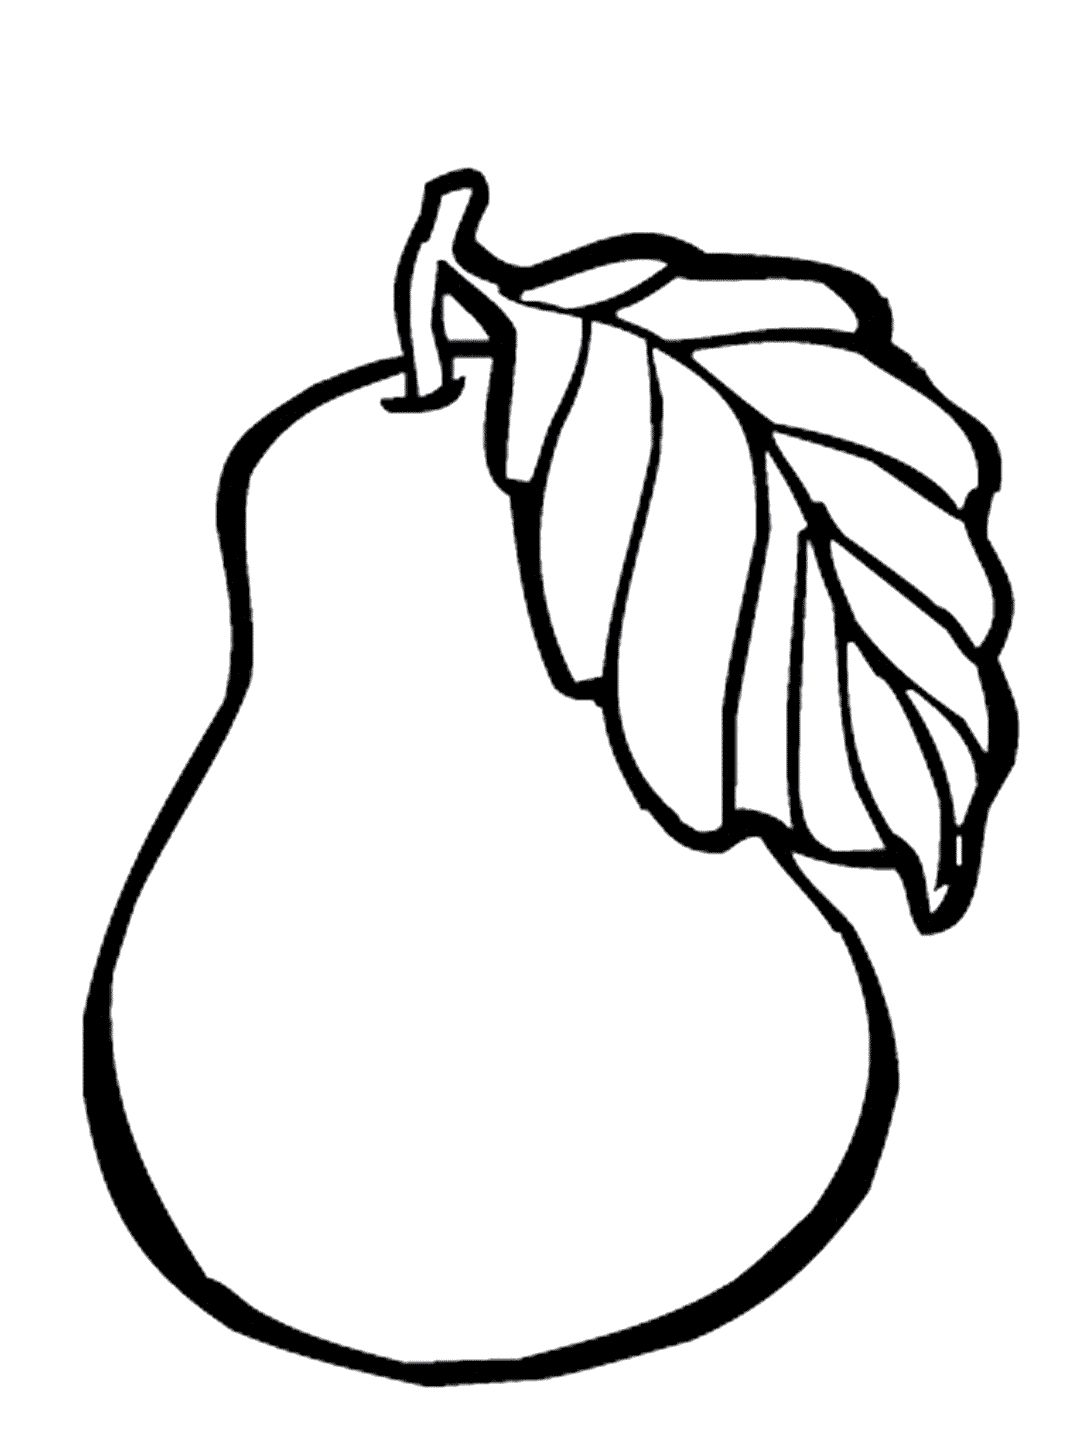 Coloring page - Sweet fruit on the tree